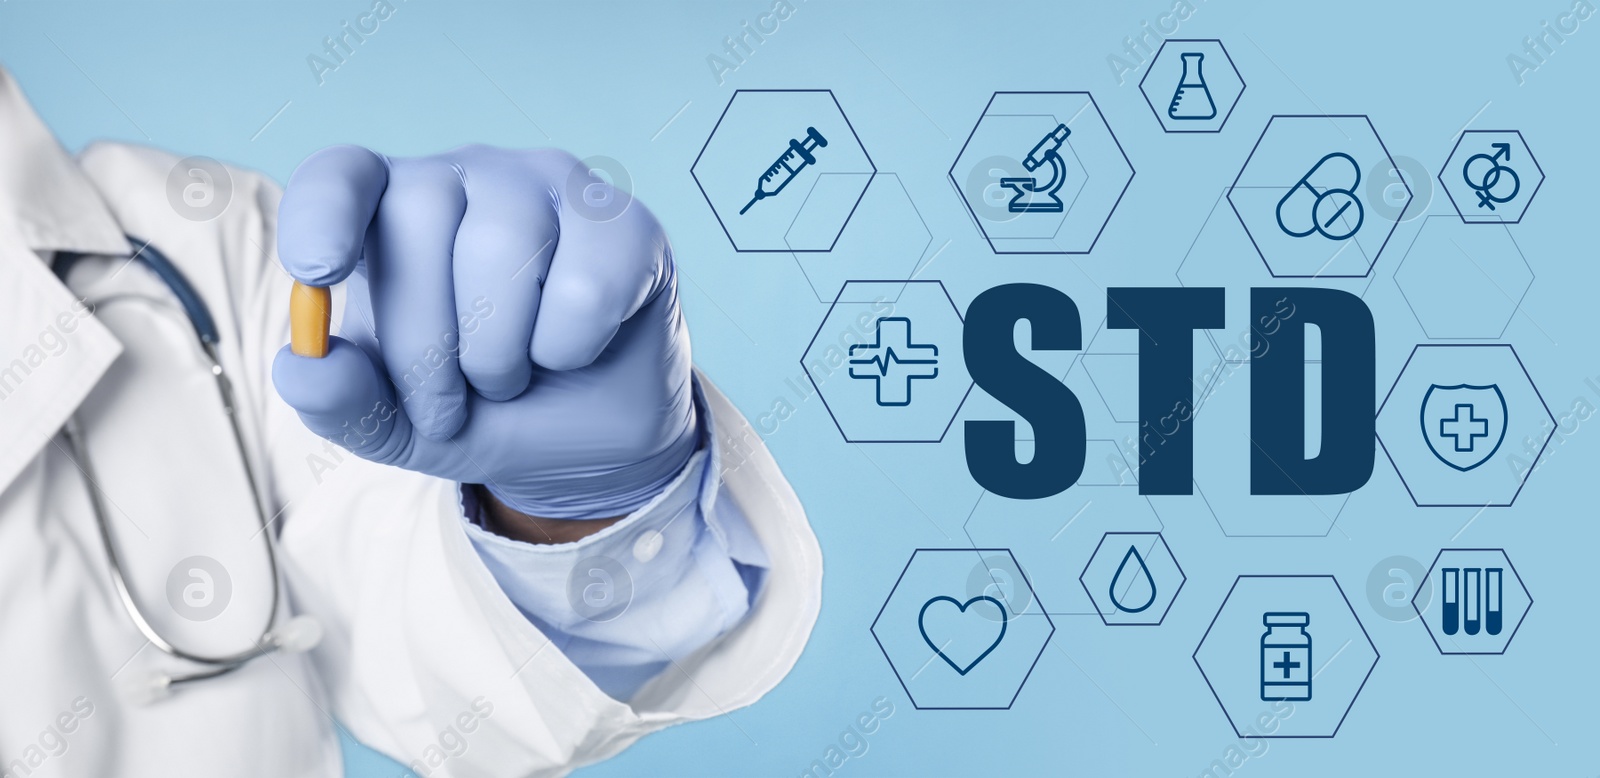 Image of STD prevention. Closeup view of doctor with suppository , abbreviation and different icons on light blue background, banner design